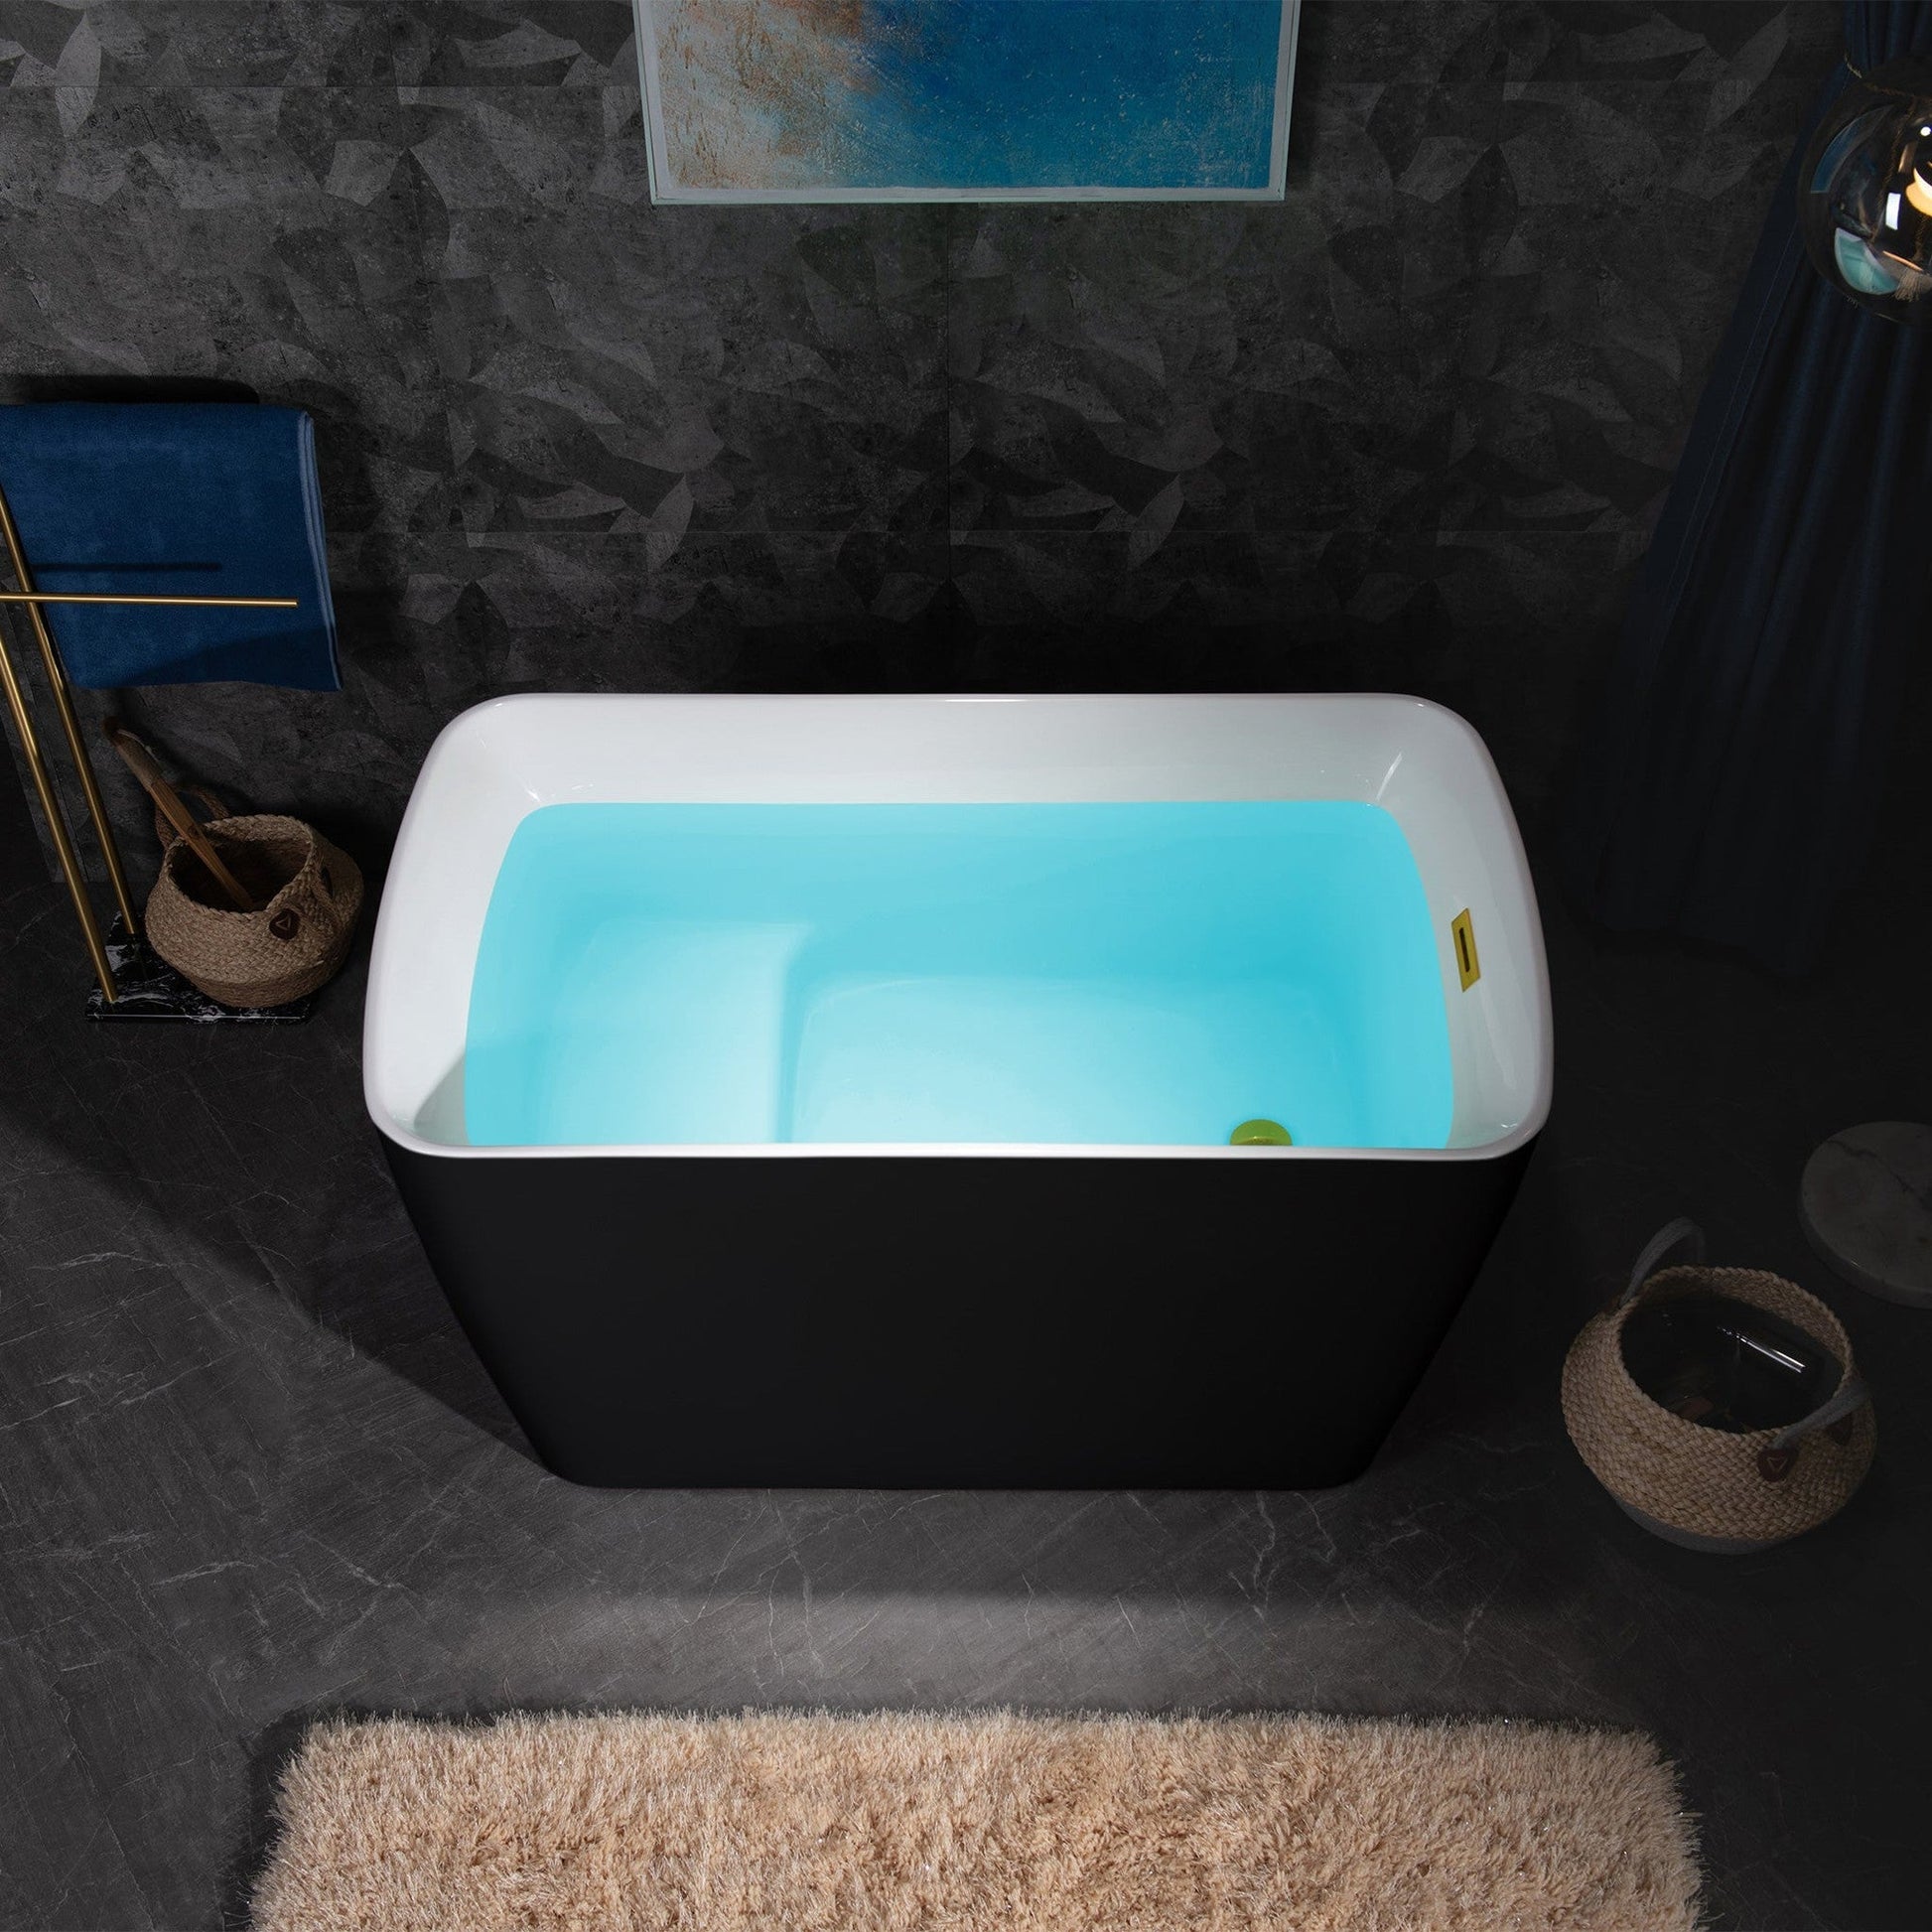 WoodBridge 48" Black Acrylic Freestanding Contemporary Soaking Tub With Pre-molded Seat, Brushed Gold Pop-up Drain, Overflow, Tub Filler and Bathtub Caddy Tray